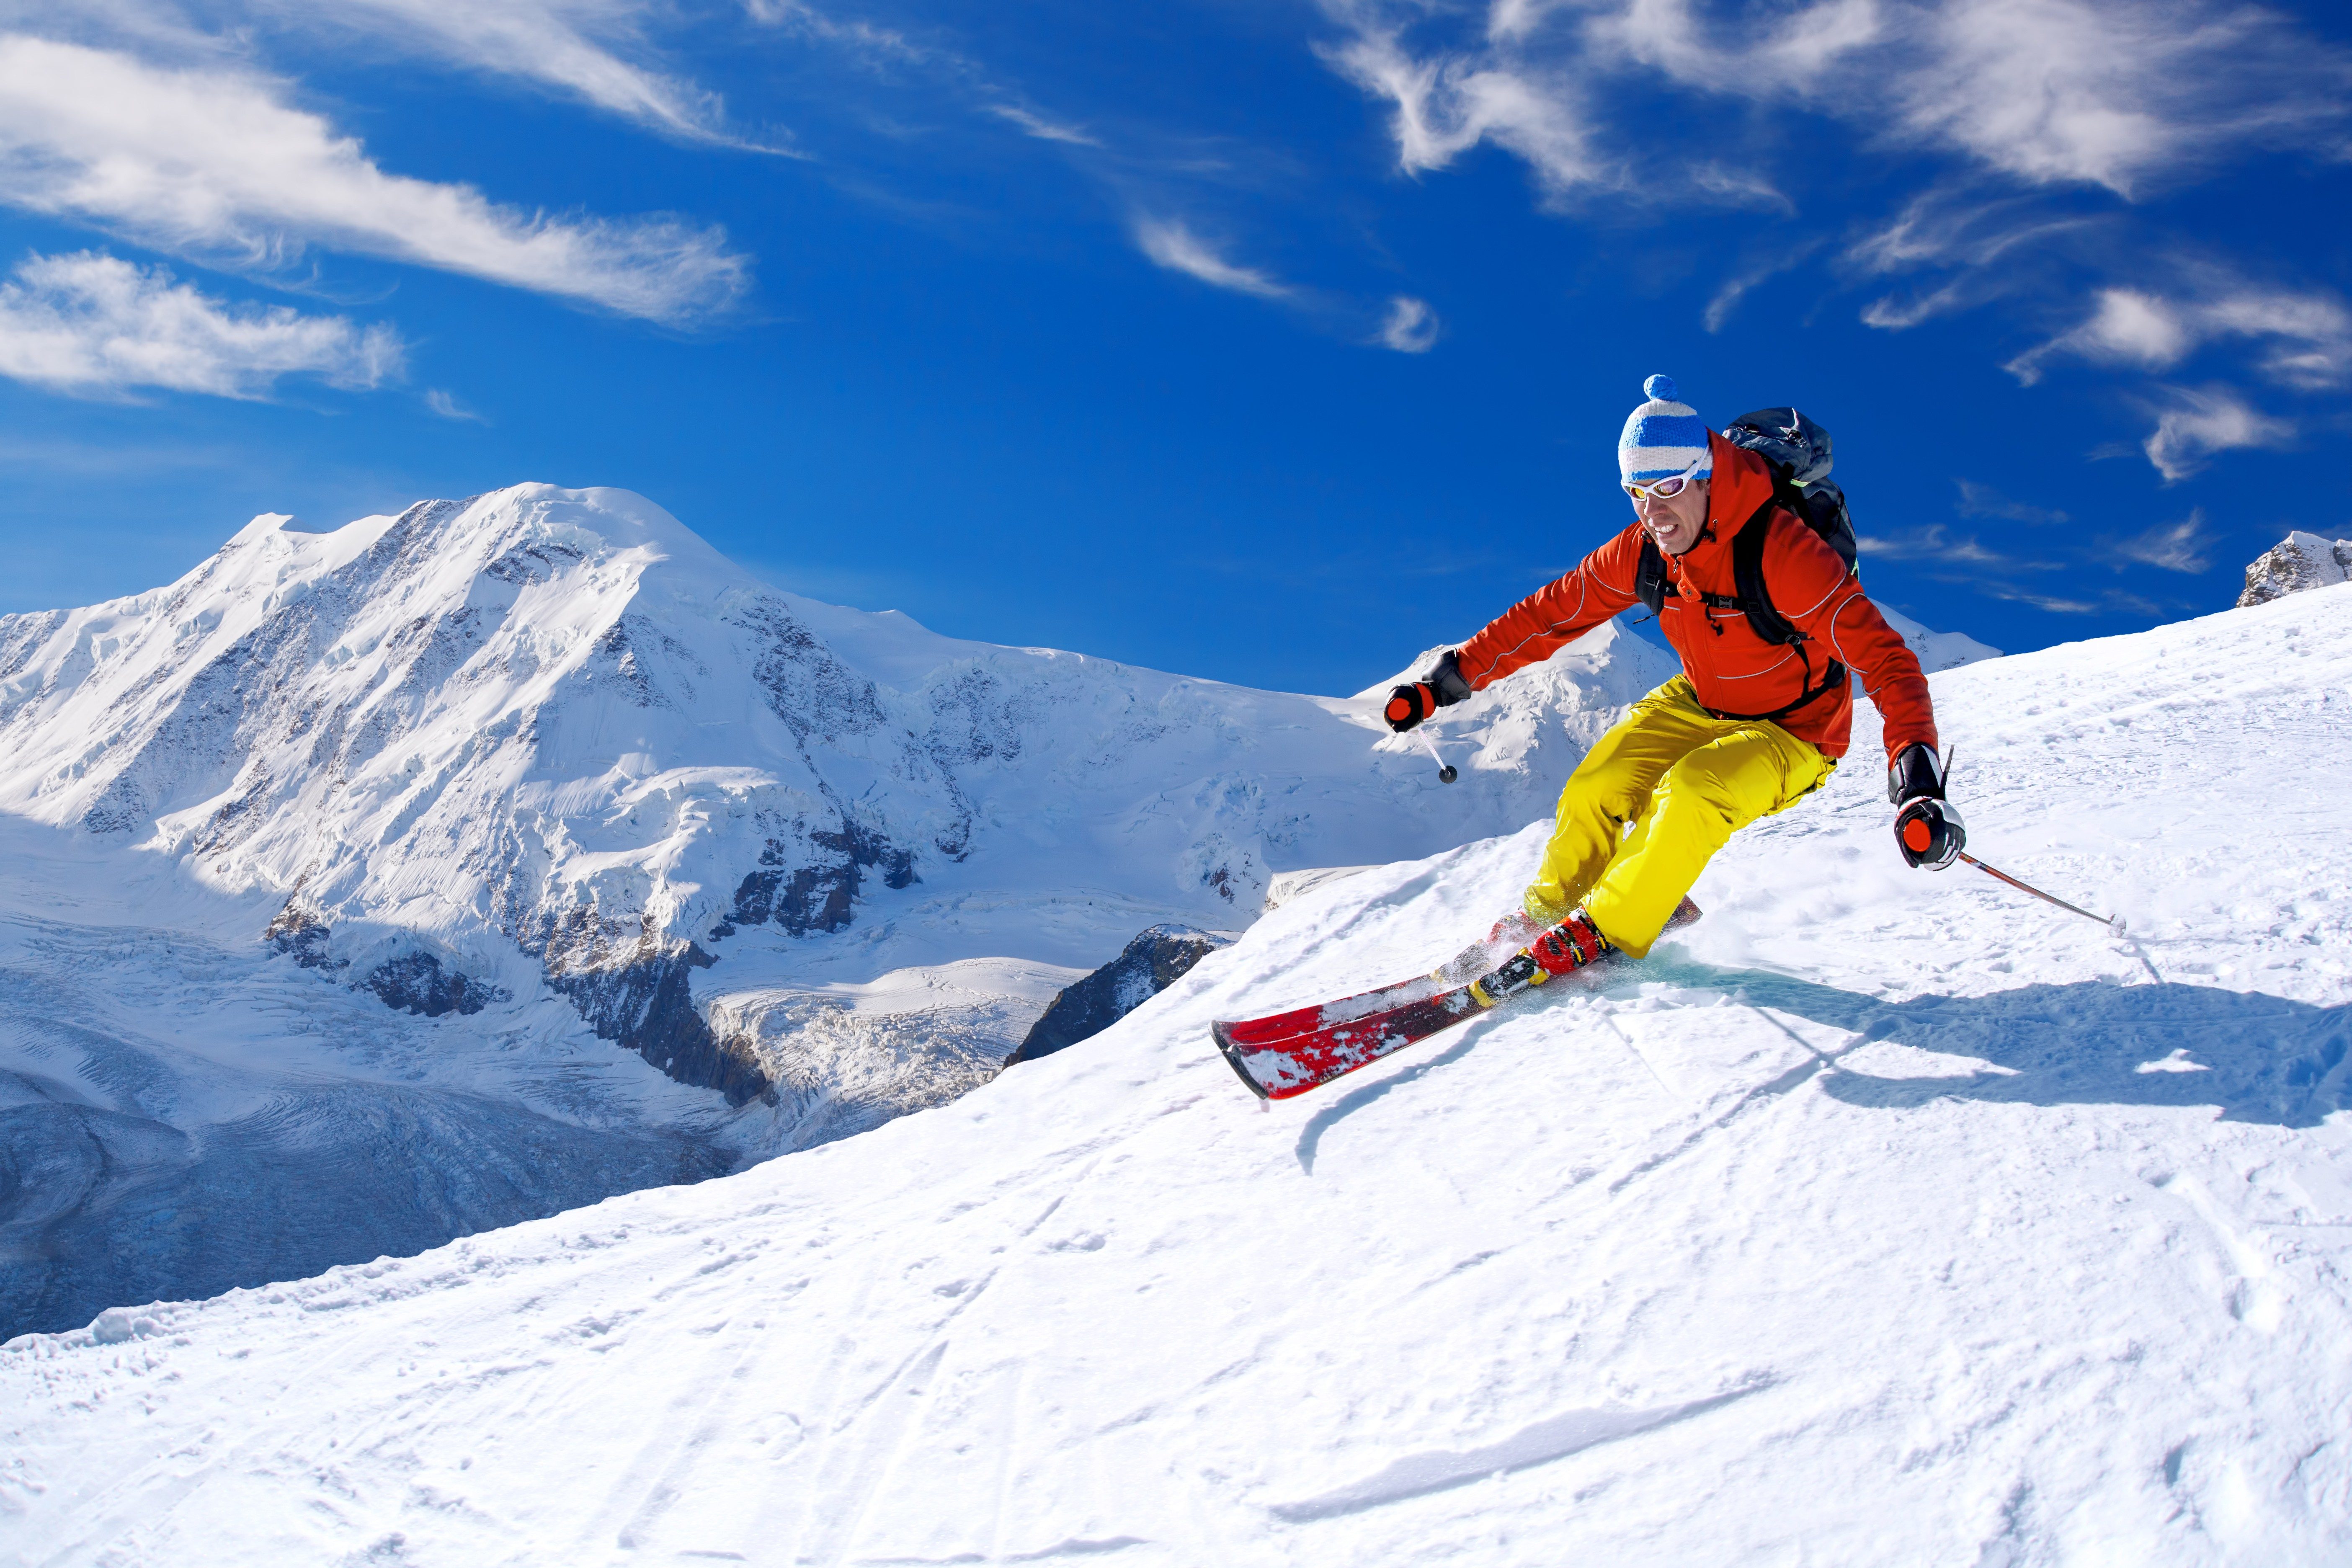 The Best Ski Resorts in Colorado to Book Now | Reader's Digest